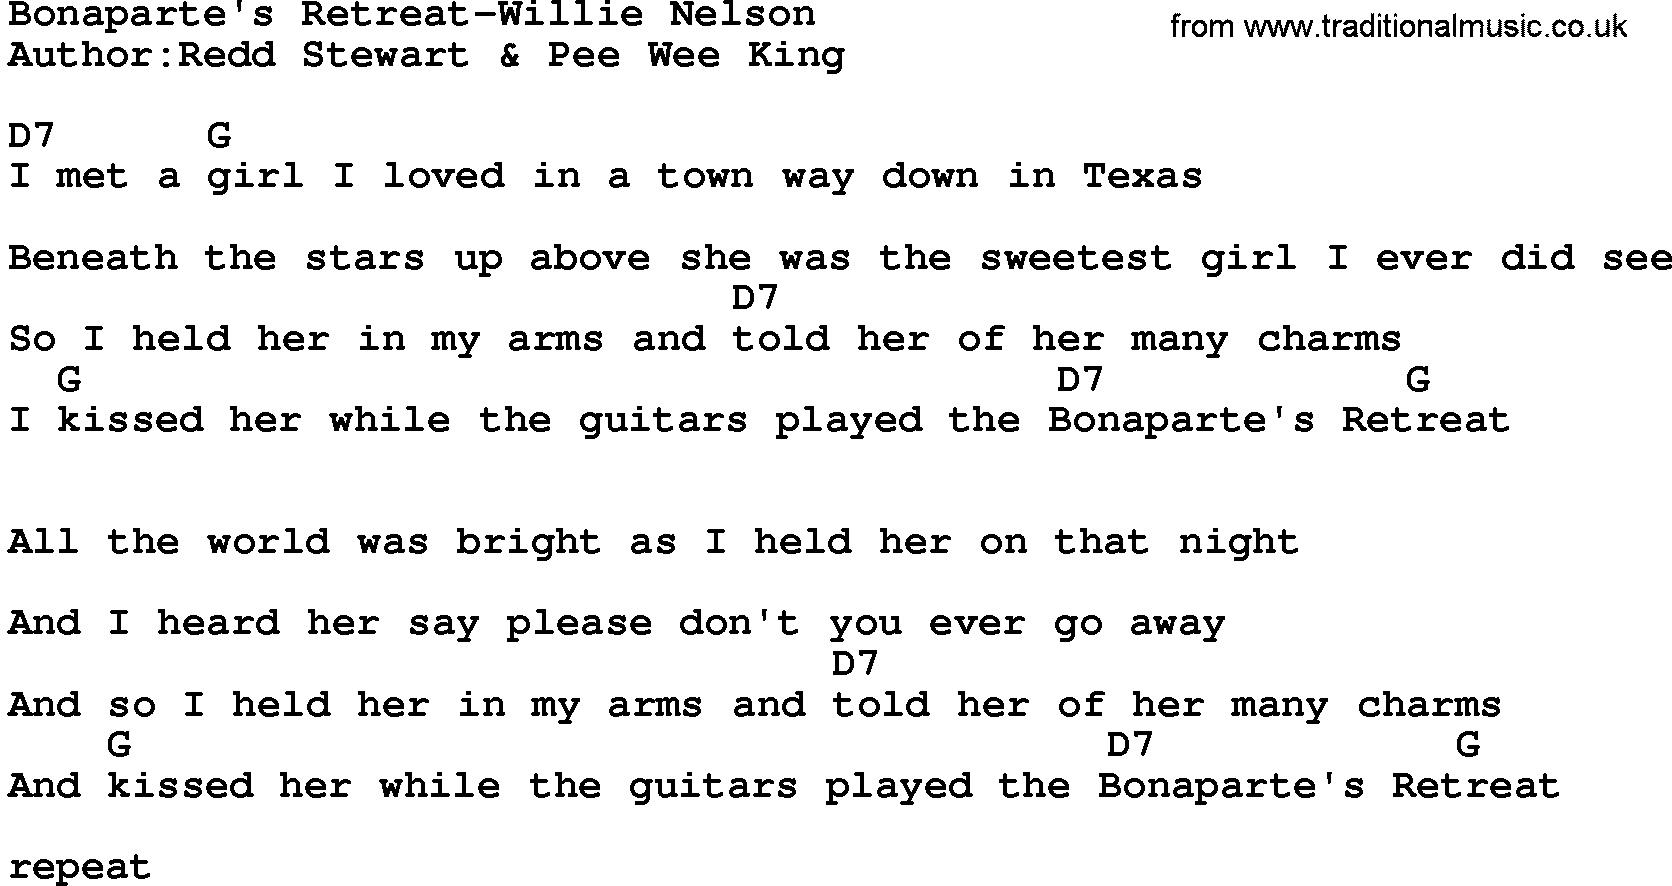 Country music song: Bonaparte's Retreat-Willie Nelson lyrics and chords